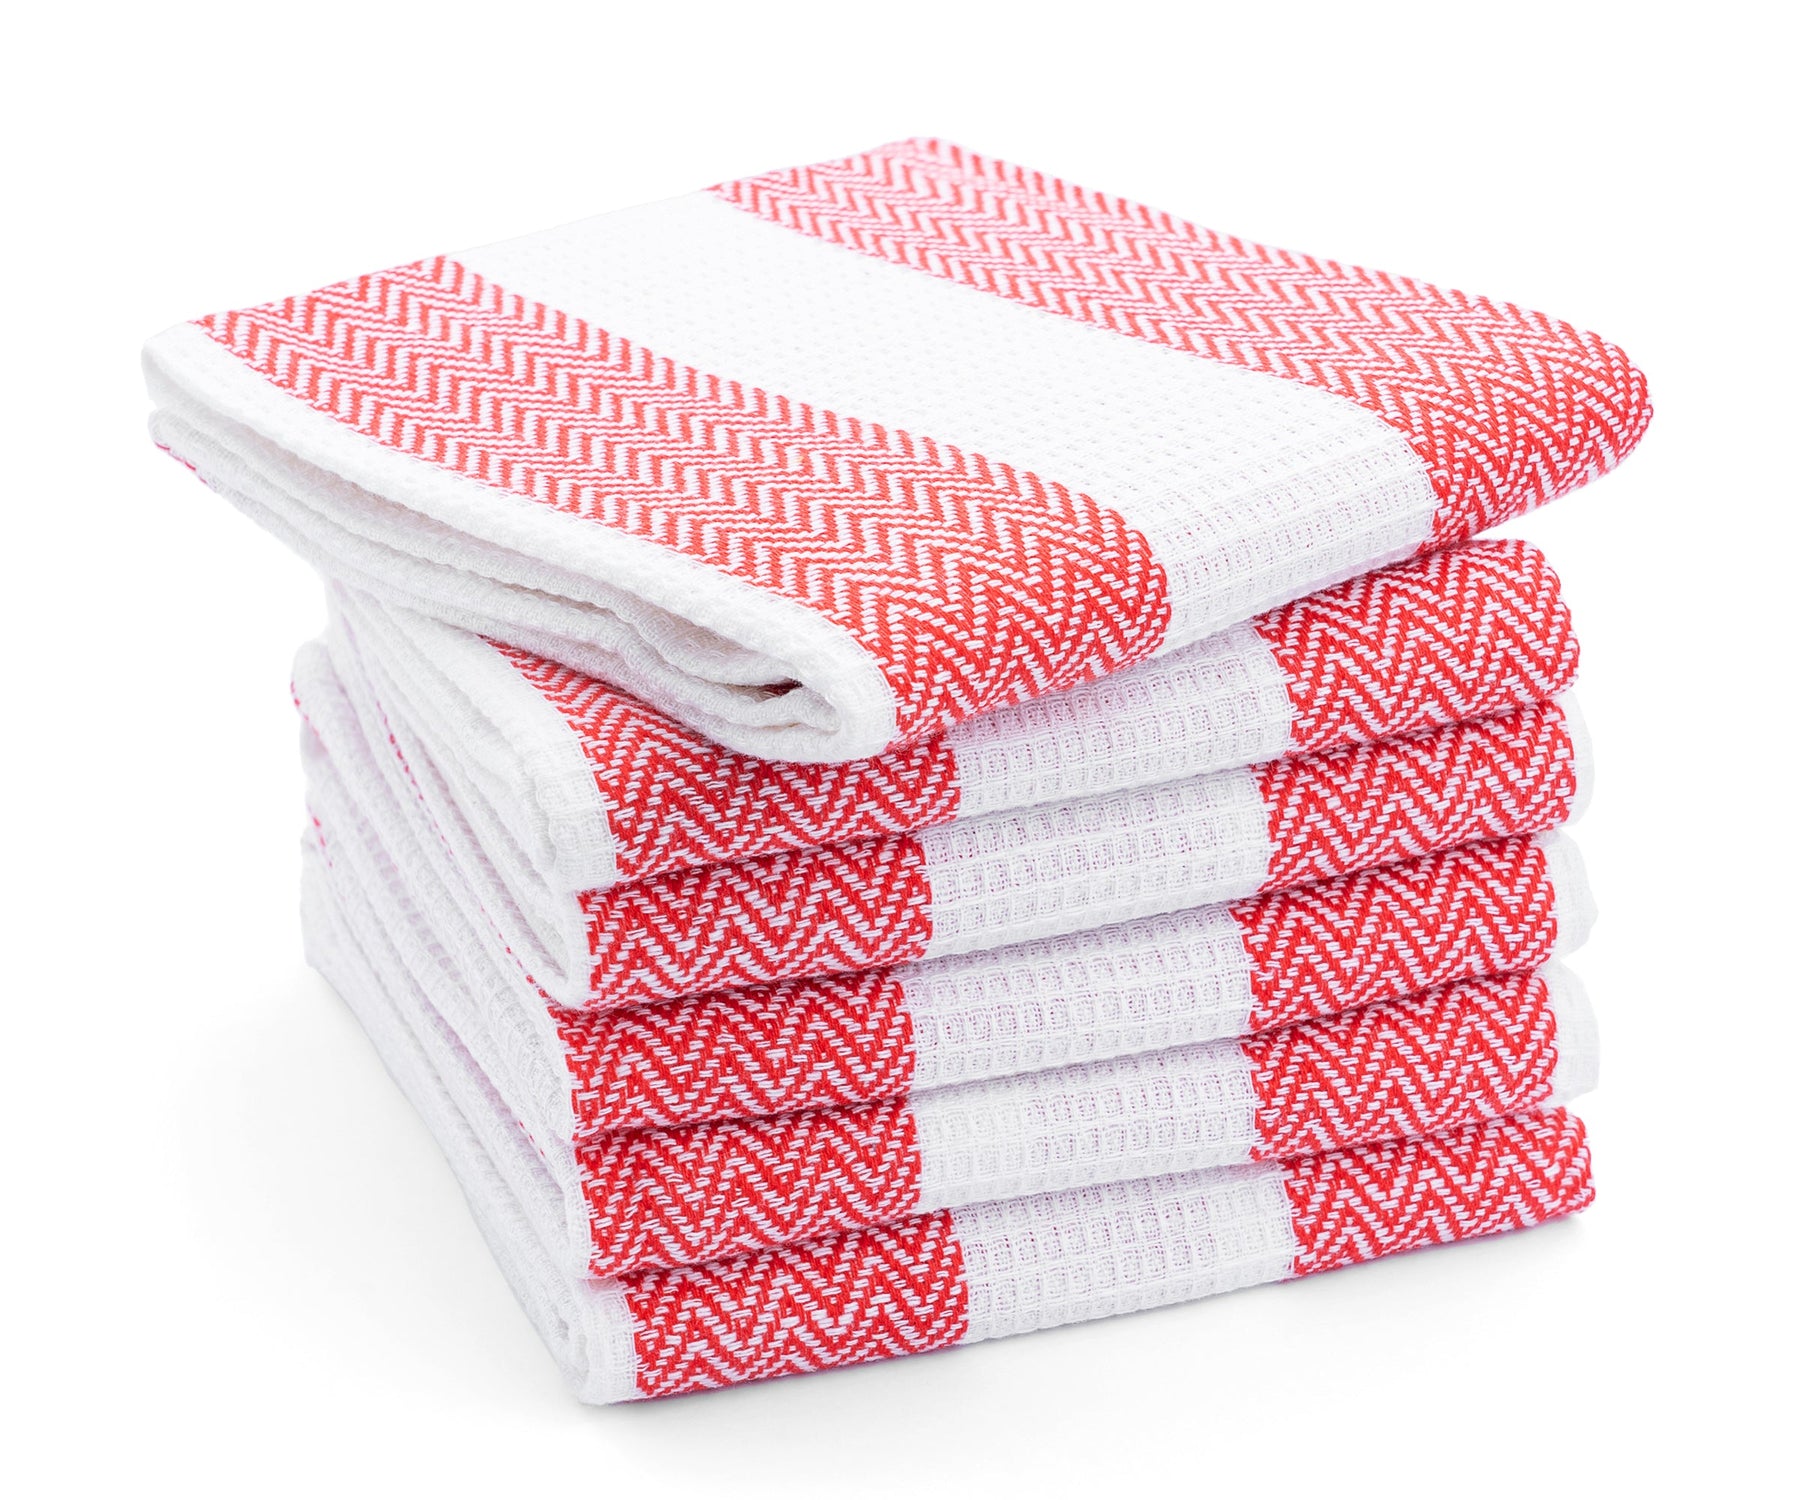 Kitchen towels, versatile essentials for any culinary space.